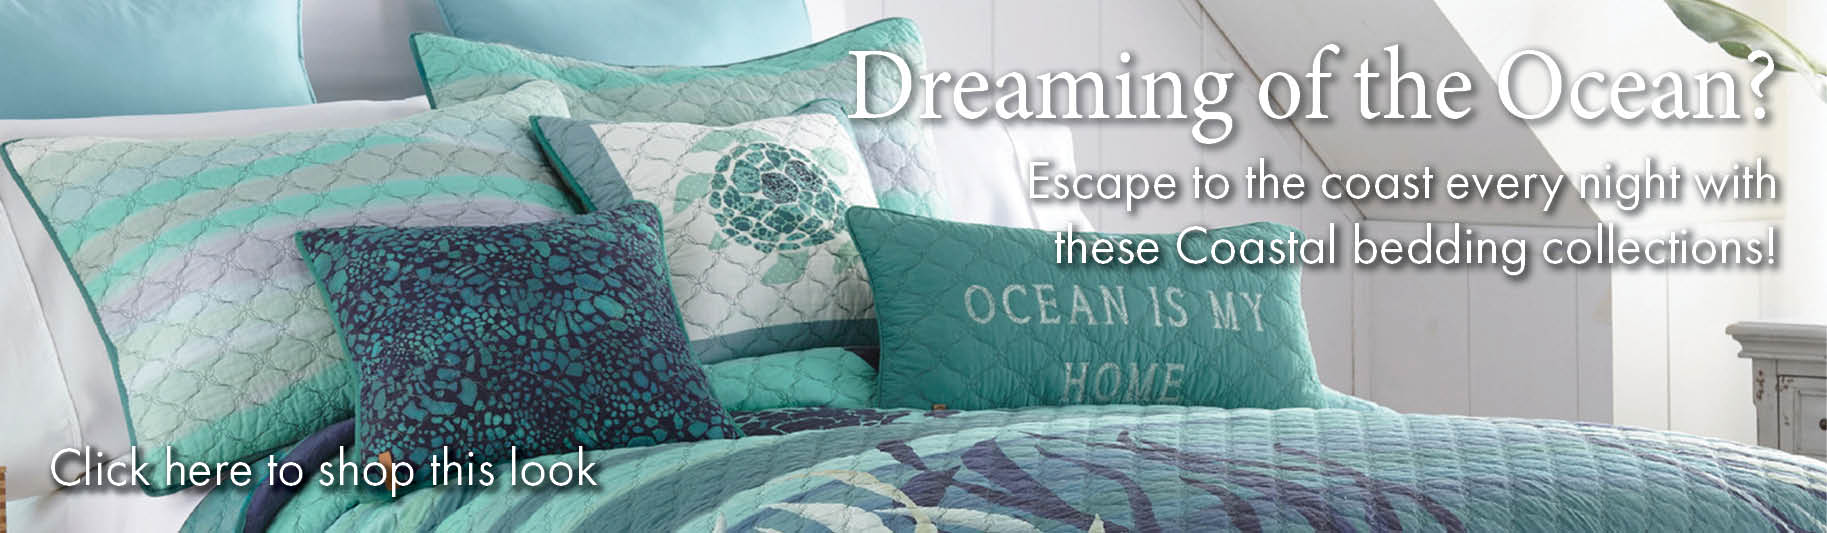 Escape to the Coast with our Coastal Bedding Collections